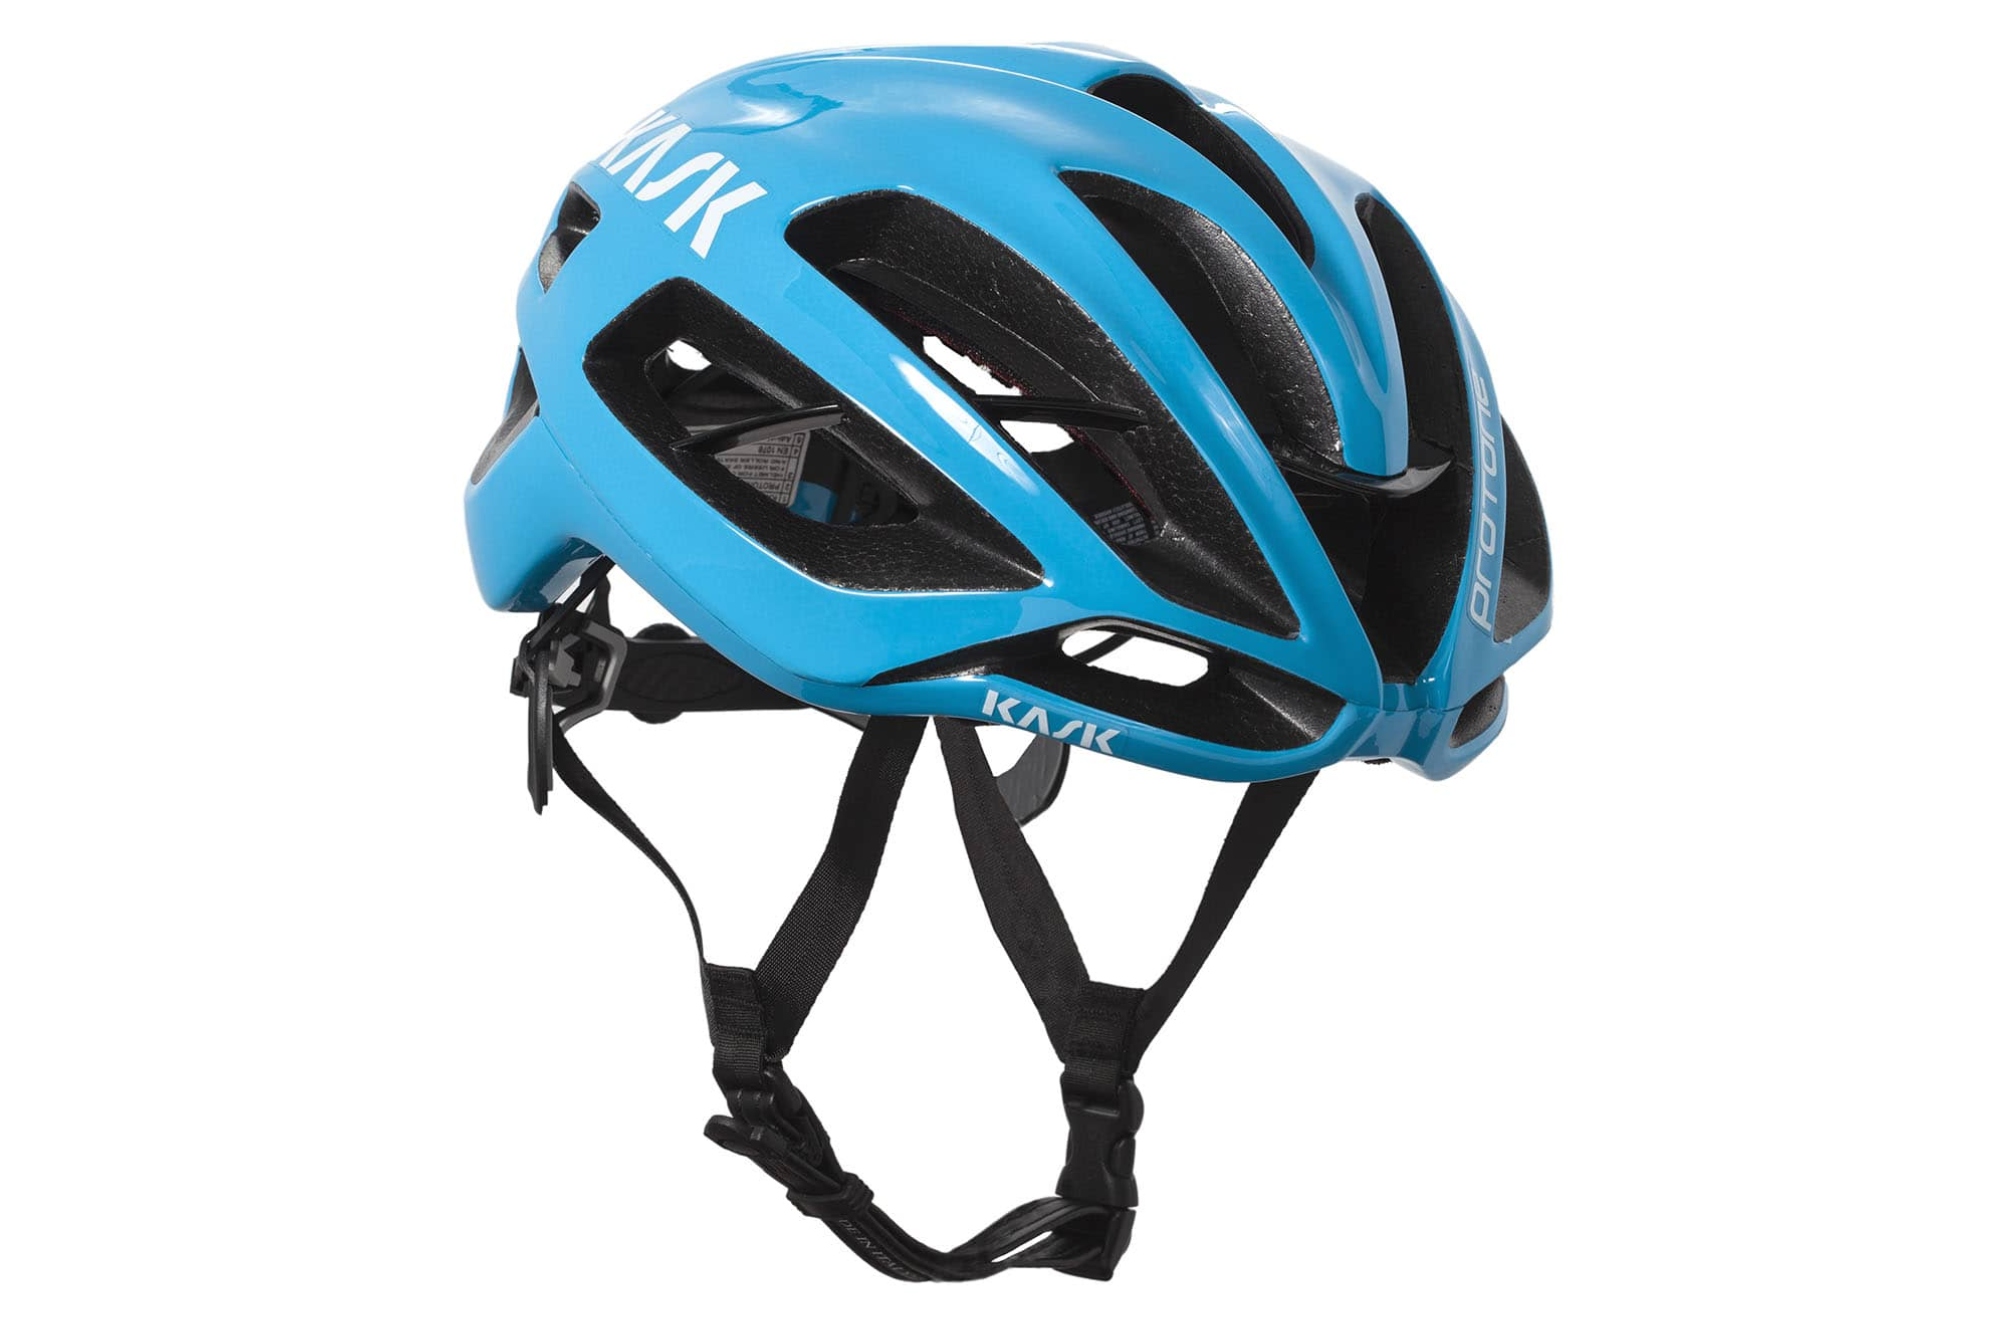 Best road bike helmets a buyer’s guide to comfortable, lightweight and